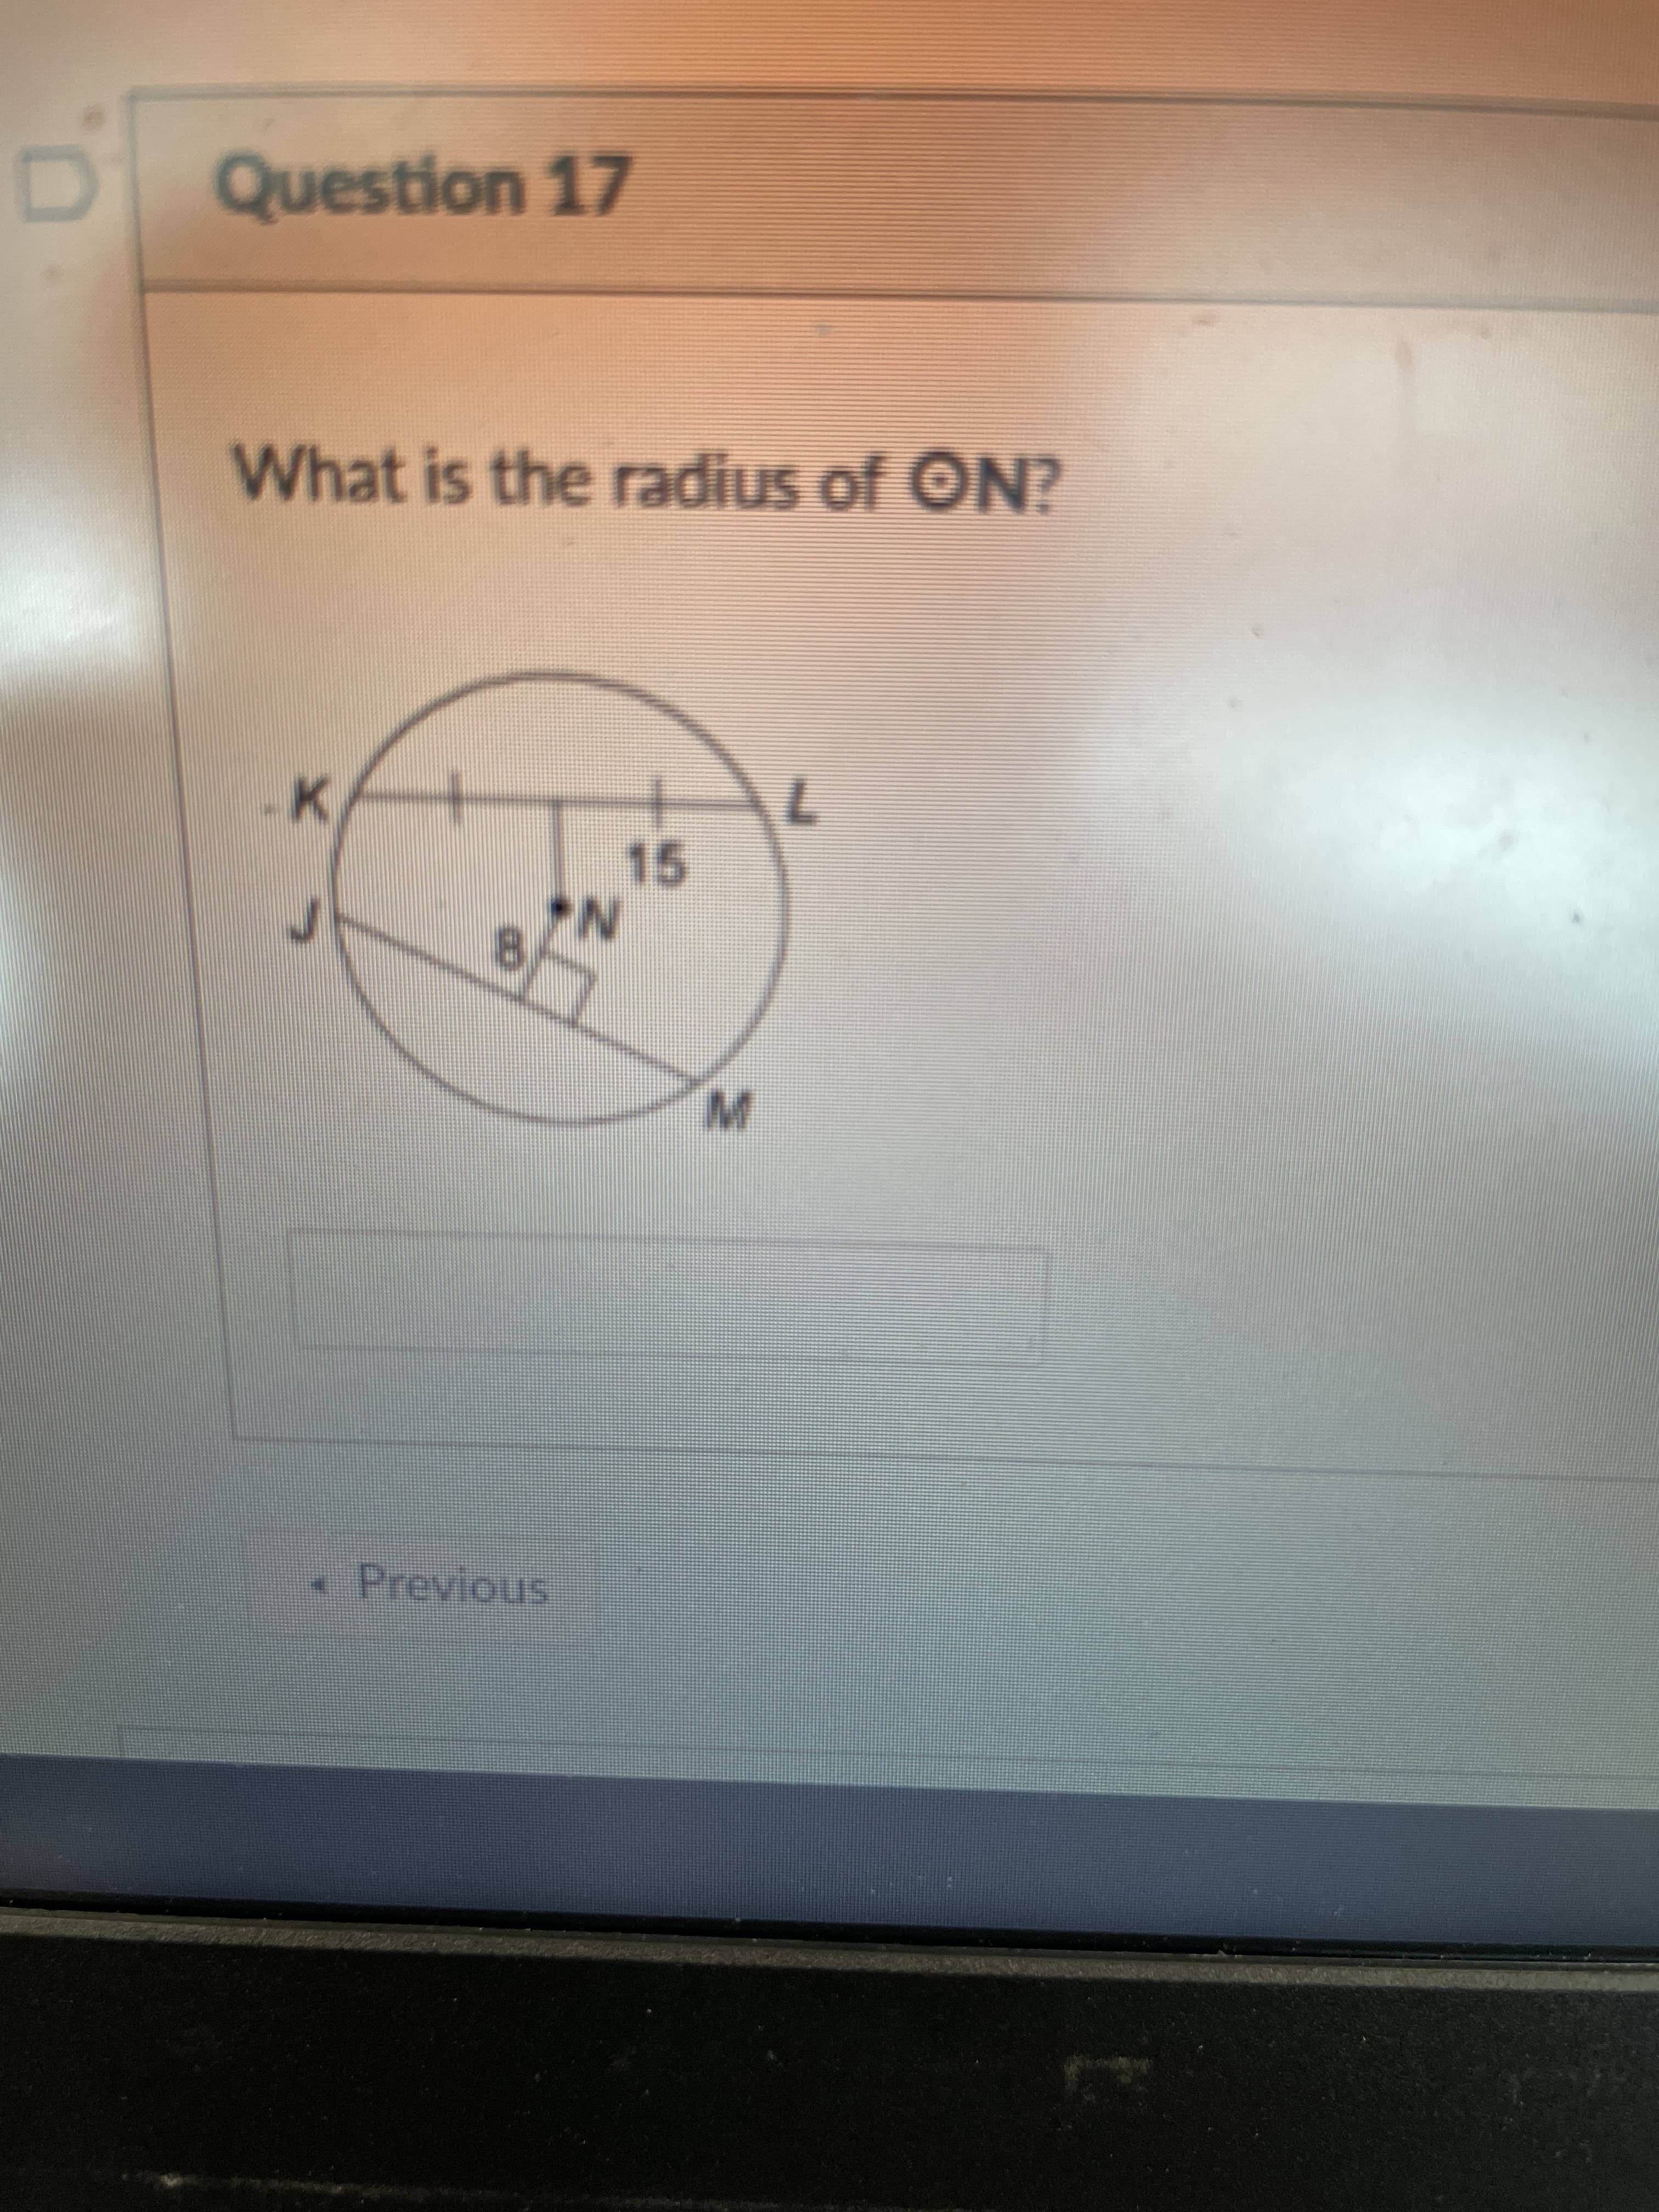 Question 17
What is the radius of ON?
15
-Previous
